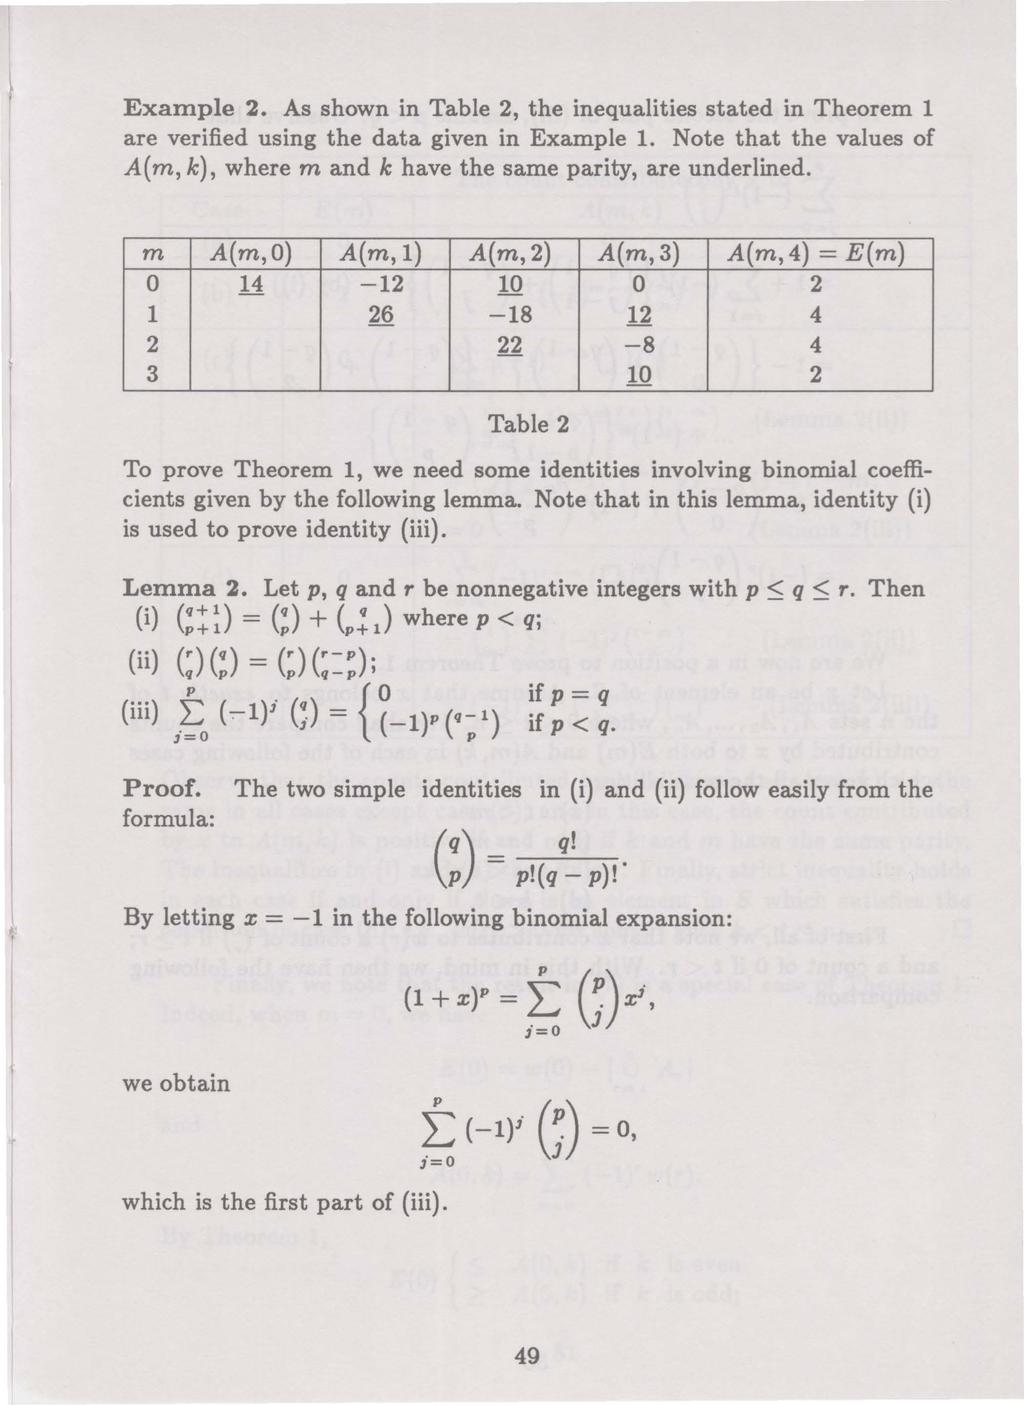 Example 2. As shown in Table 2, the inequalities stated in Theorem 1 are verified using the data given in Example 1.